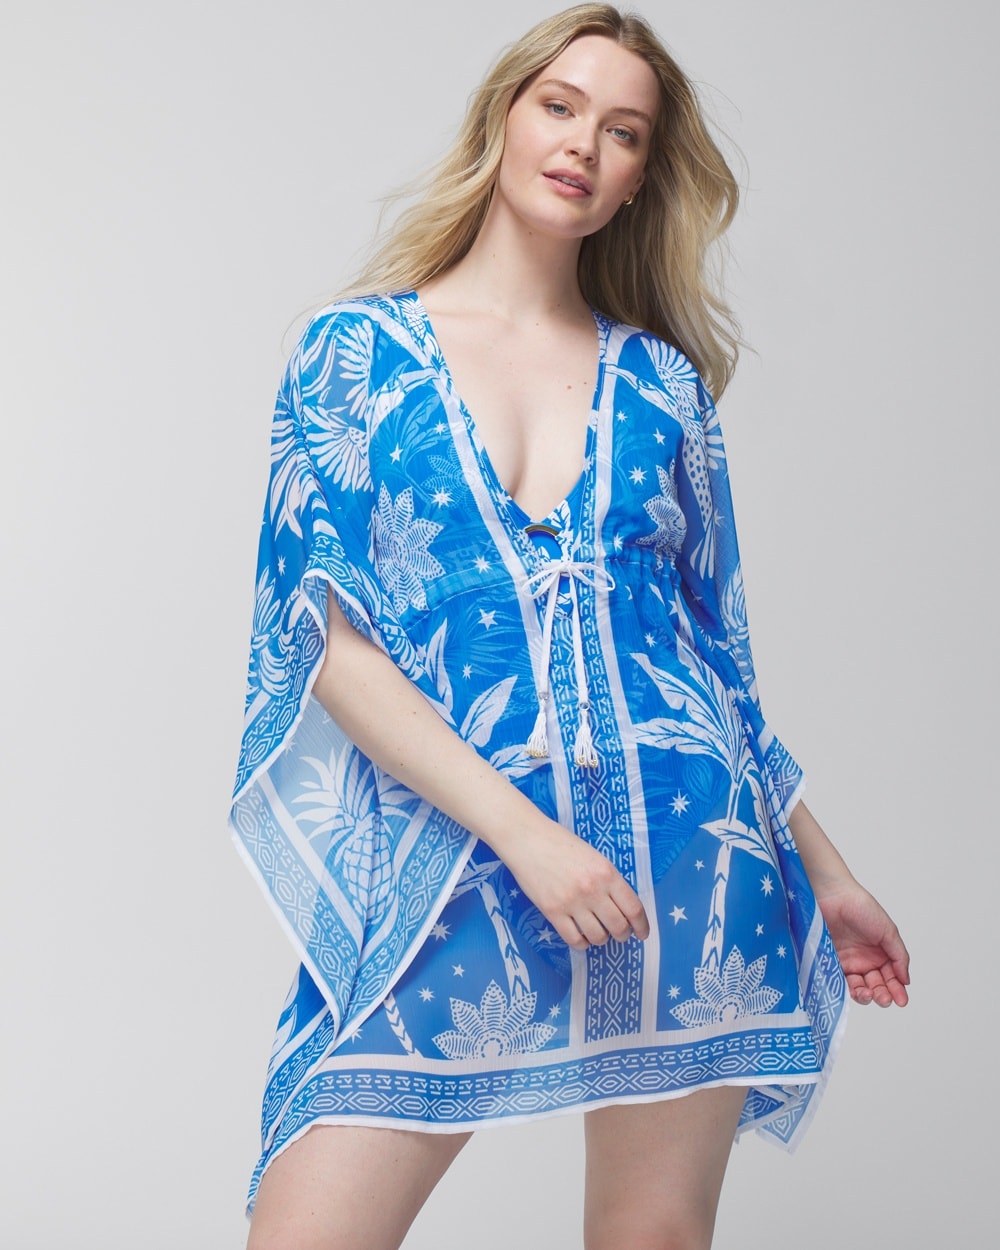 Bleu Rod A Pace In The Sun Caftan Cover-Up